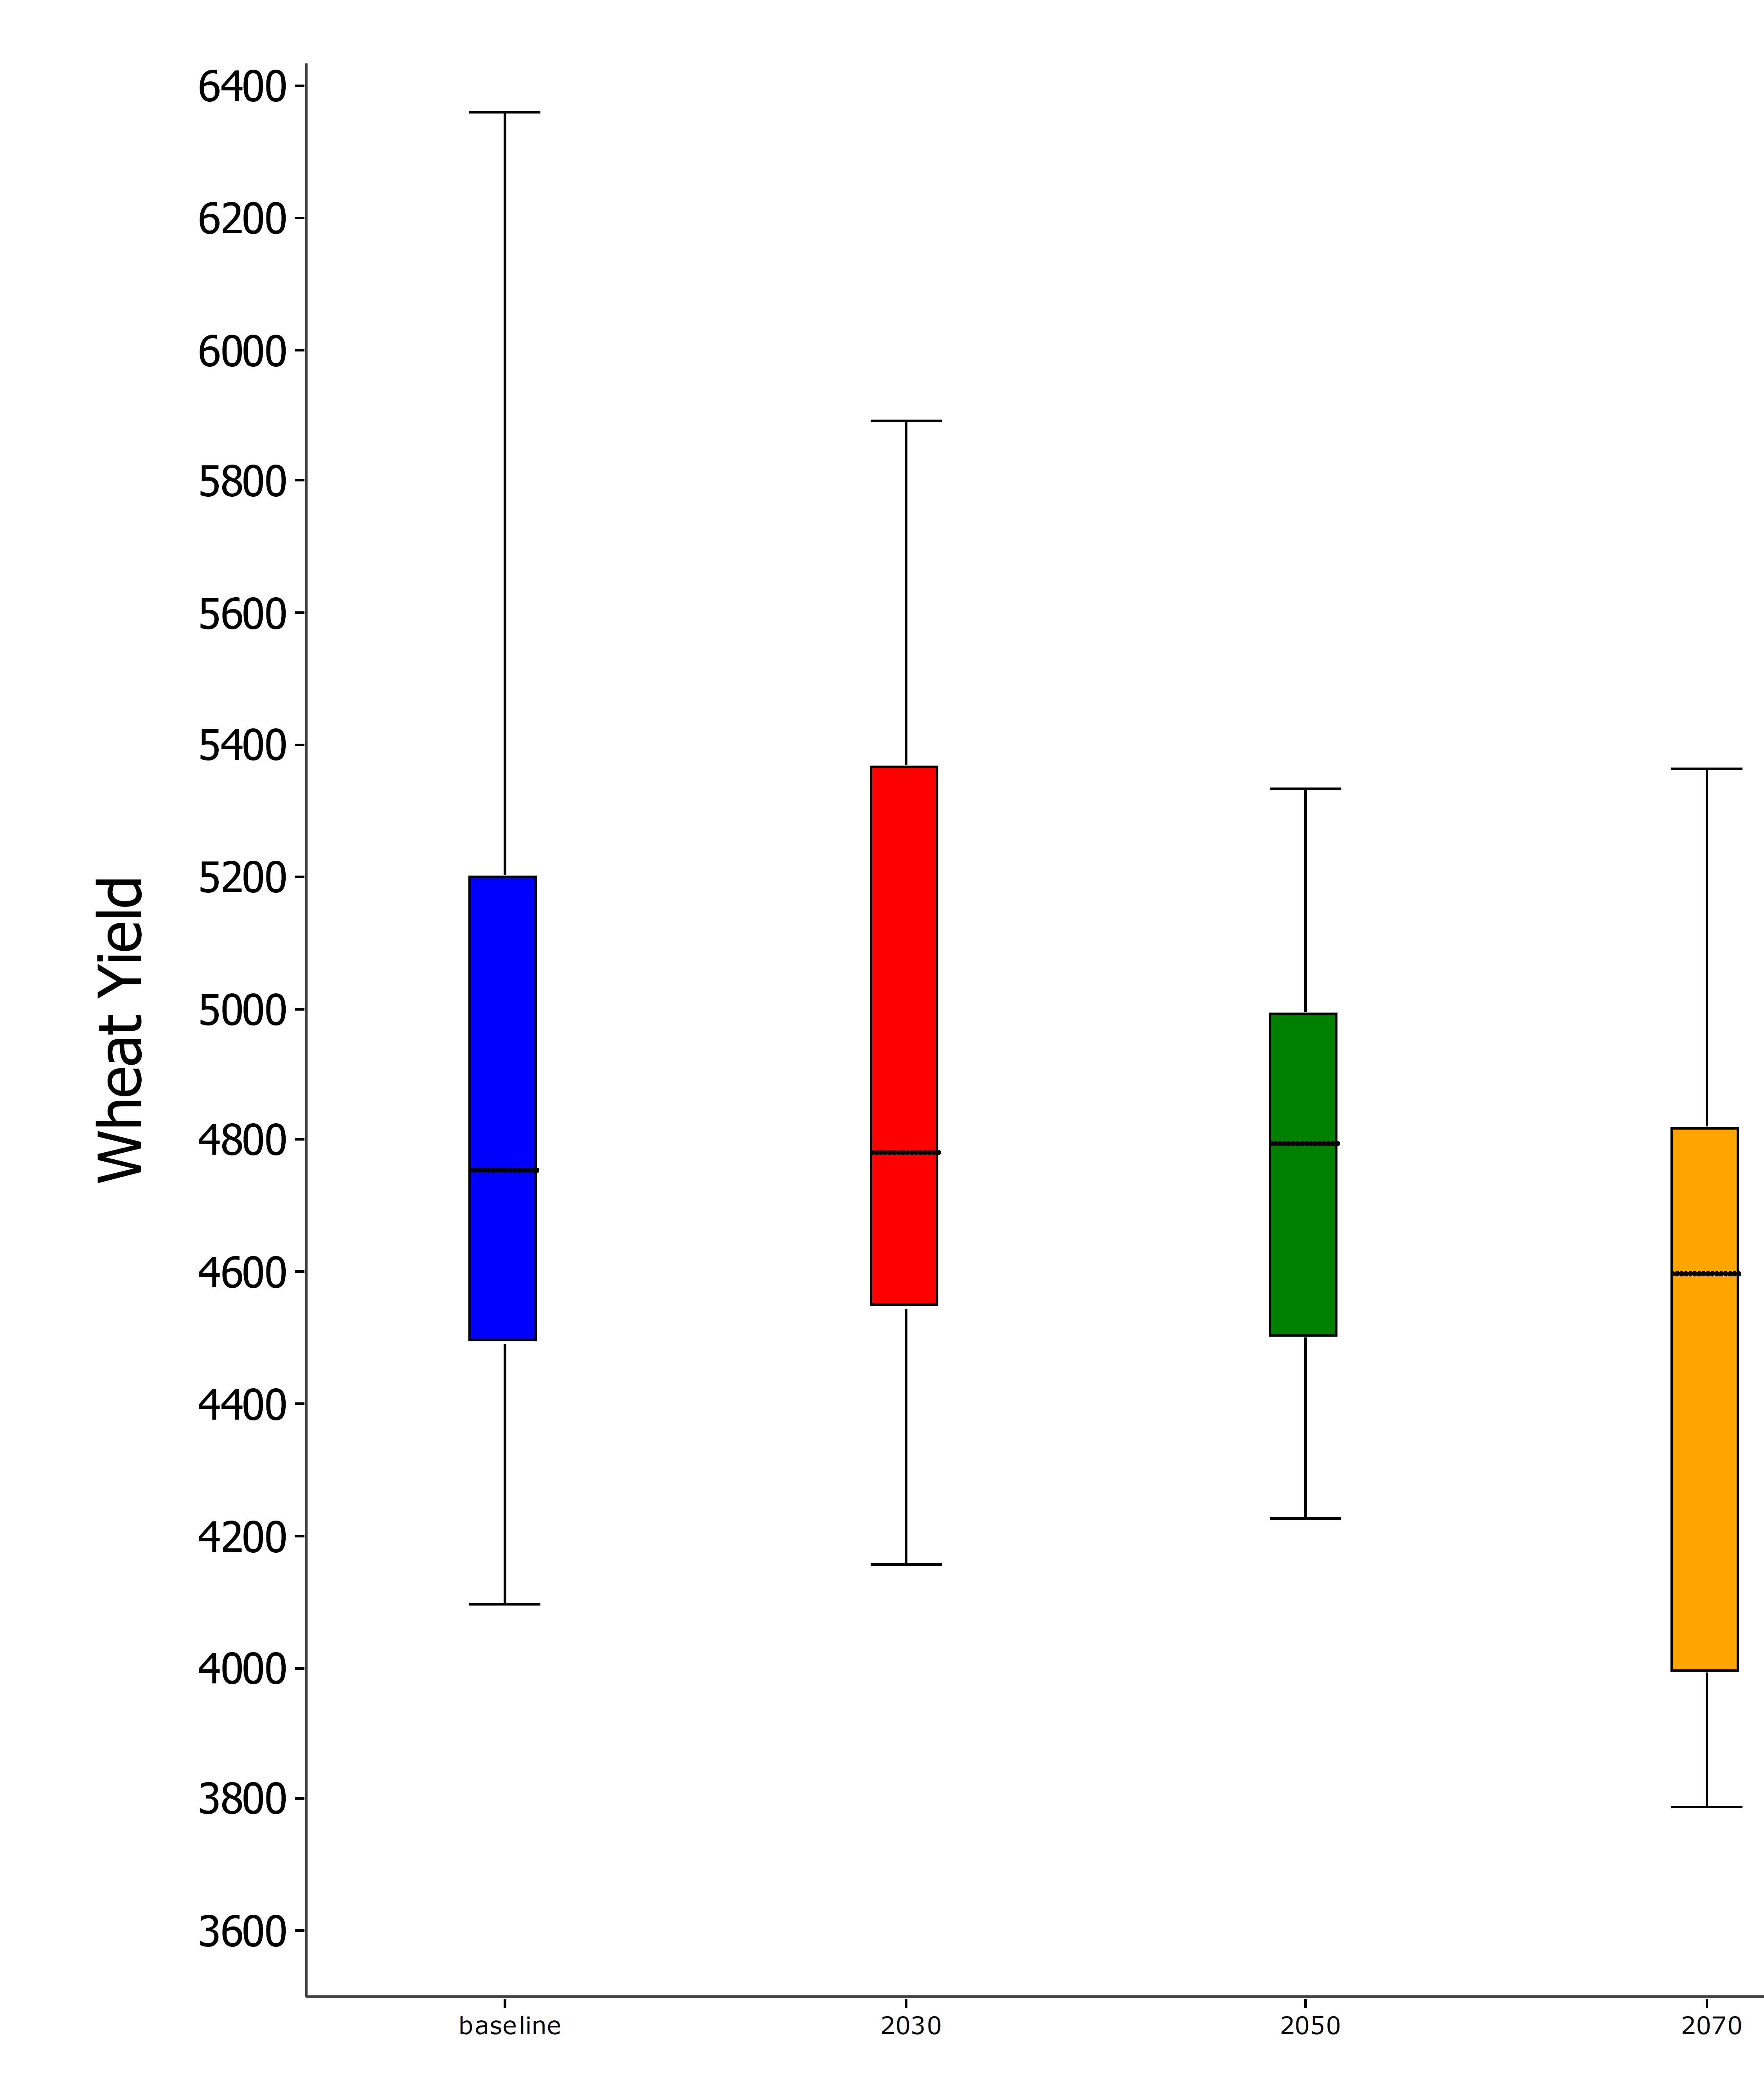 This is a boxplot graph showing  wheat yield for Goondiwindi for the period 1990 to 2018 (baseline), for a 28 year period centred on 2030, 2050 and 2070. If the 1990 to 2018 climate were to change, with a mean increase in temperature of 1.1oC and a 5% decline in annual rainfall (i.e. the mean 2030 projection) small improvements (approximately 80 kg per hectare) might be possible for 5th and 25th percentile yields (Figure 3).  The 75th percentile yields could also improve by as much as 200 kg per hectare, however the 95th percentile yields could decline by as much as 500 kg per hectare.